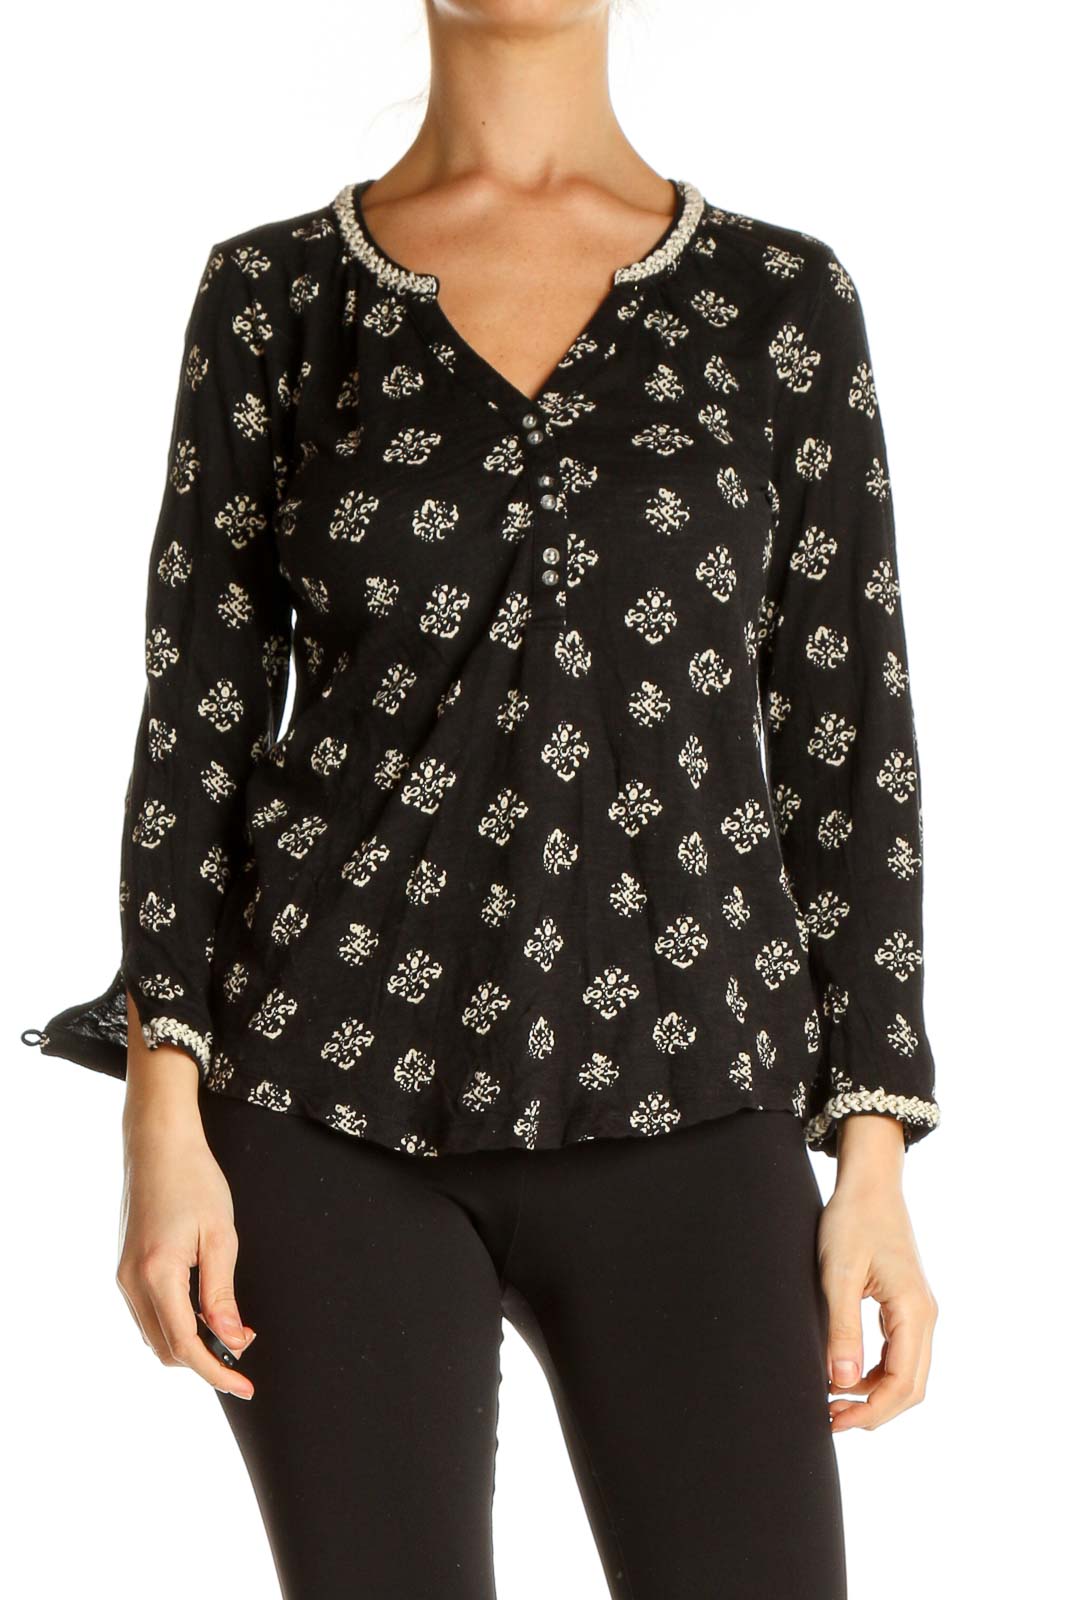 Black Floral Print All Day Wear Blouse Front